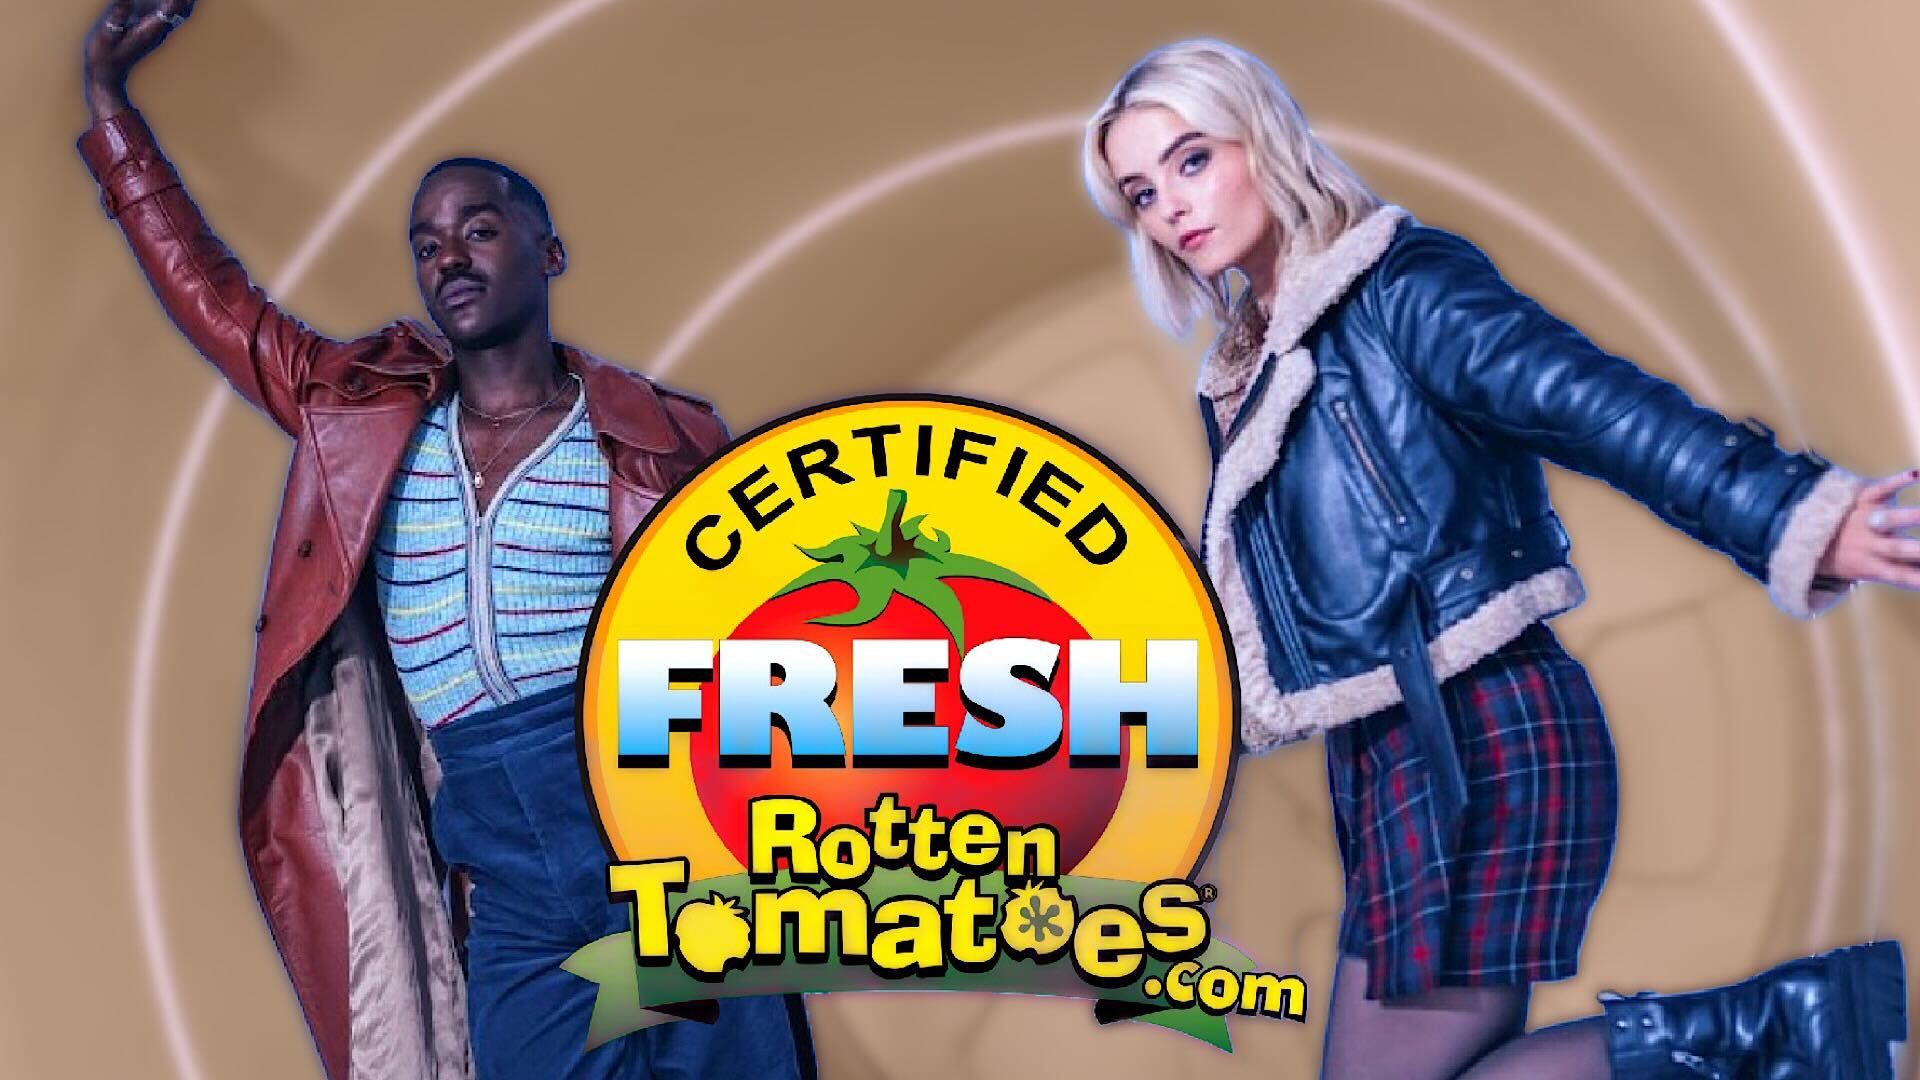 Doctor Who stars Ncuti Gatwa and Millie Gibson with Rotten Tomatoes logo